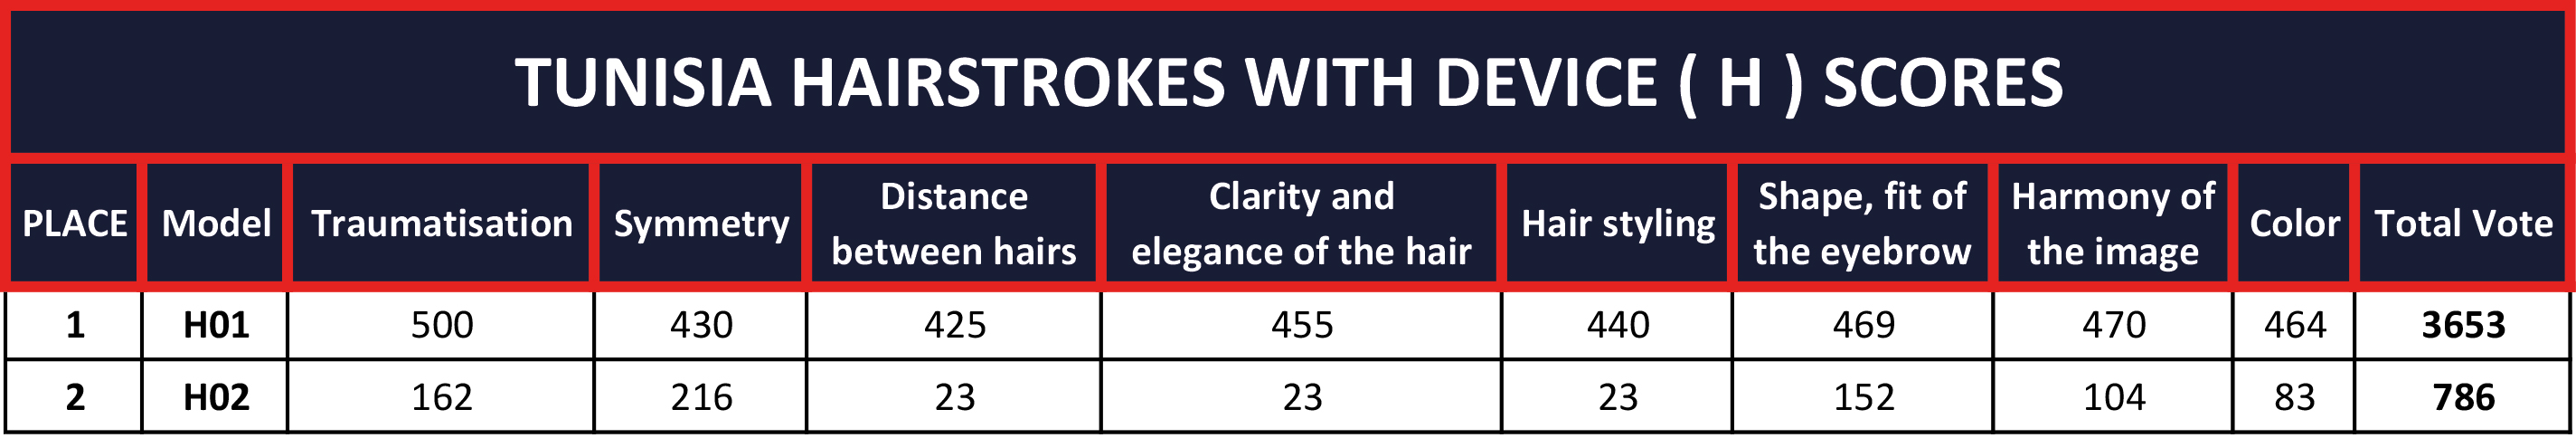 TUNISIA-HAIRSTROKES-WITH-DEVICE-(-H-)-SCORES